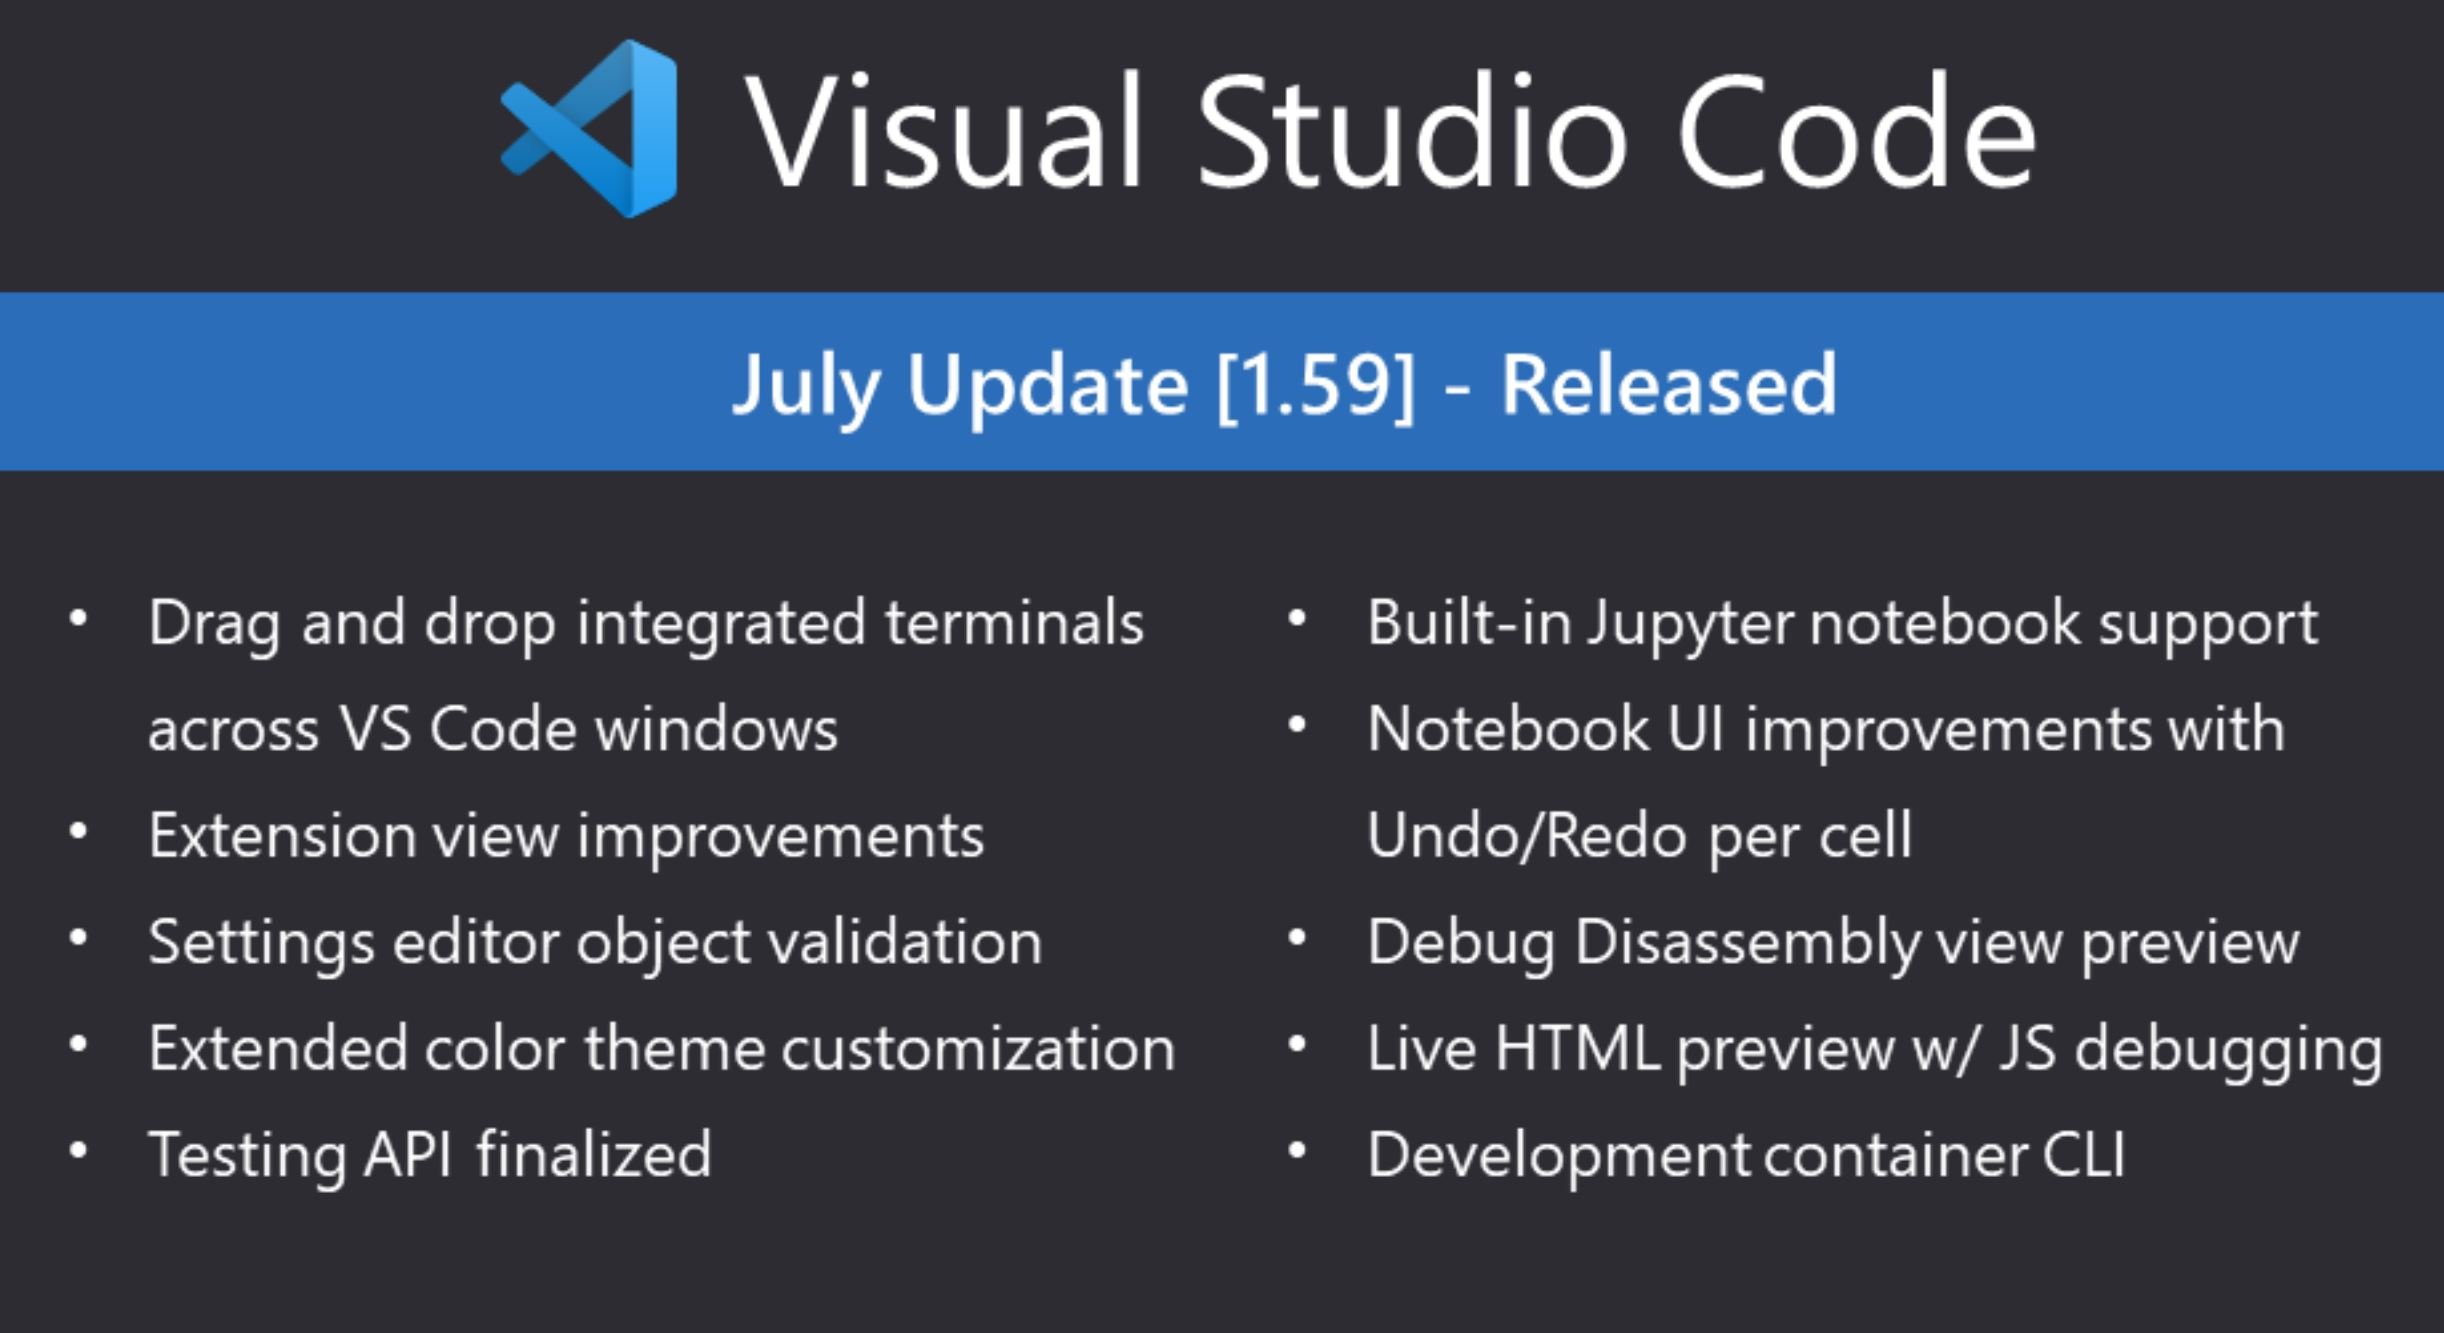 Microsoft releases Visual Studio Code v1.59 with Live HTML preview with JS debugging and more